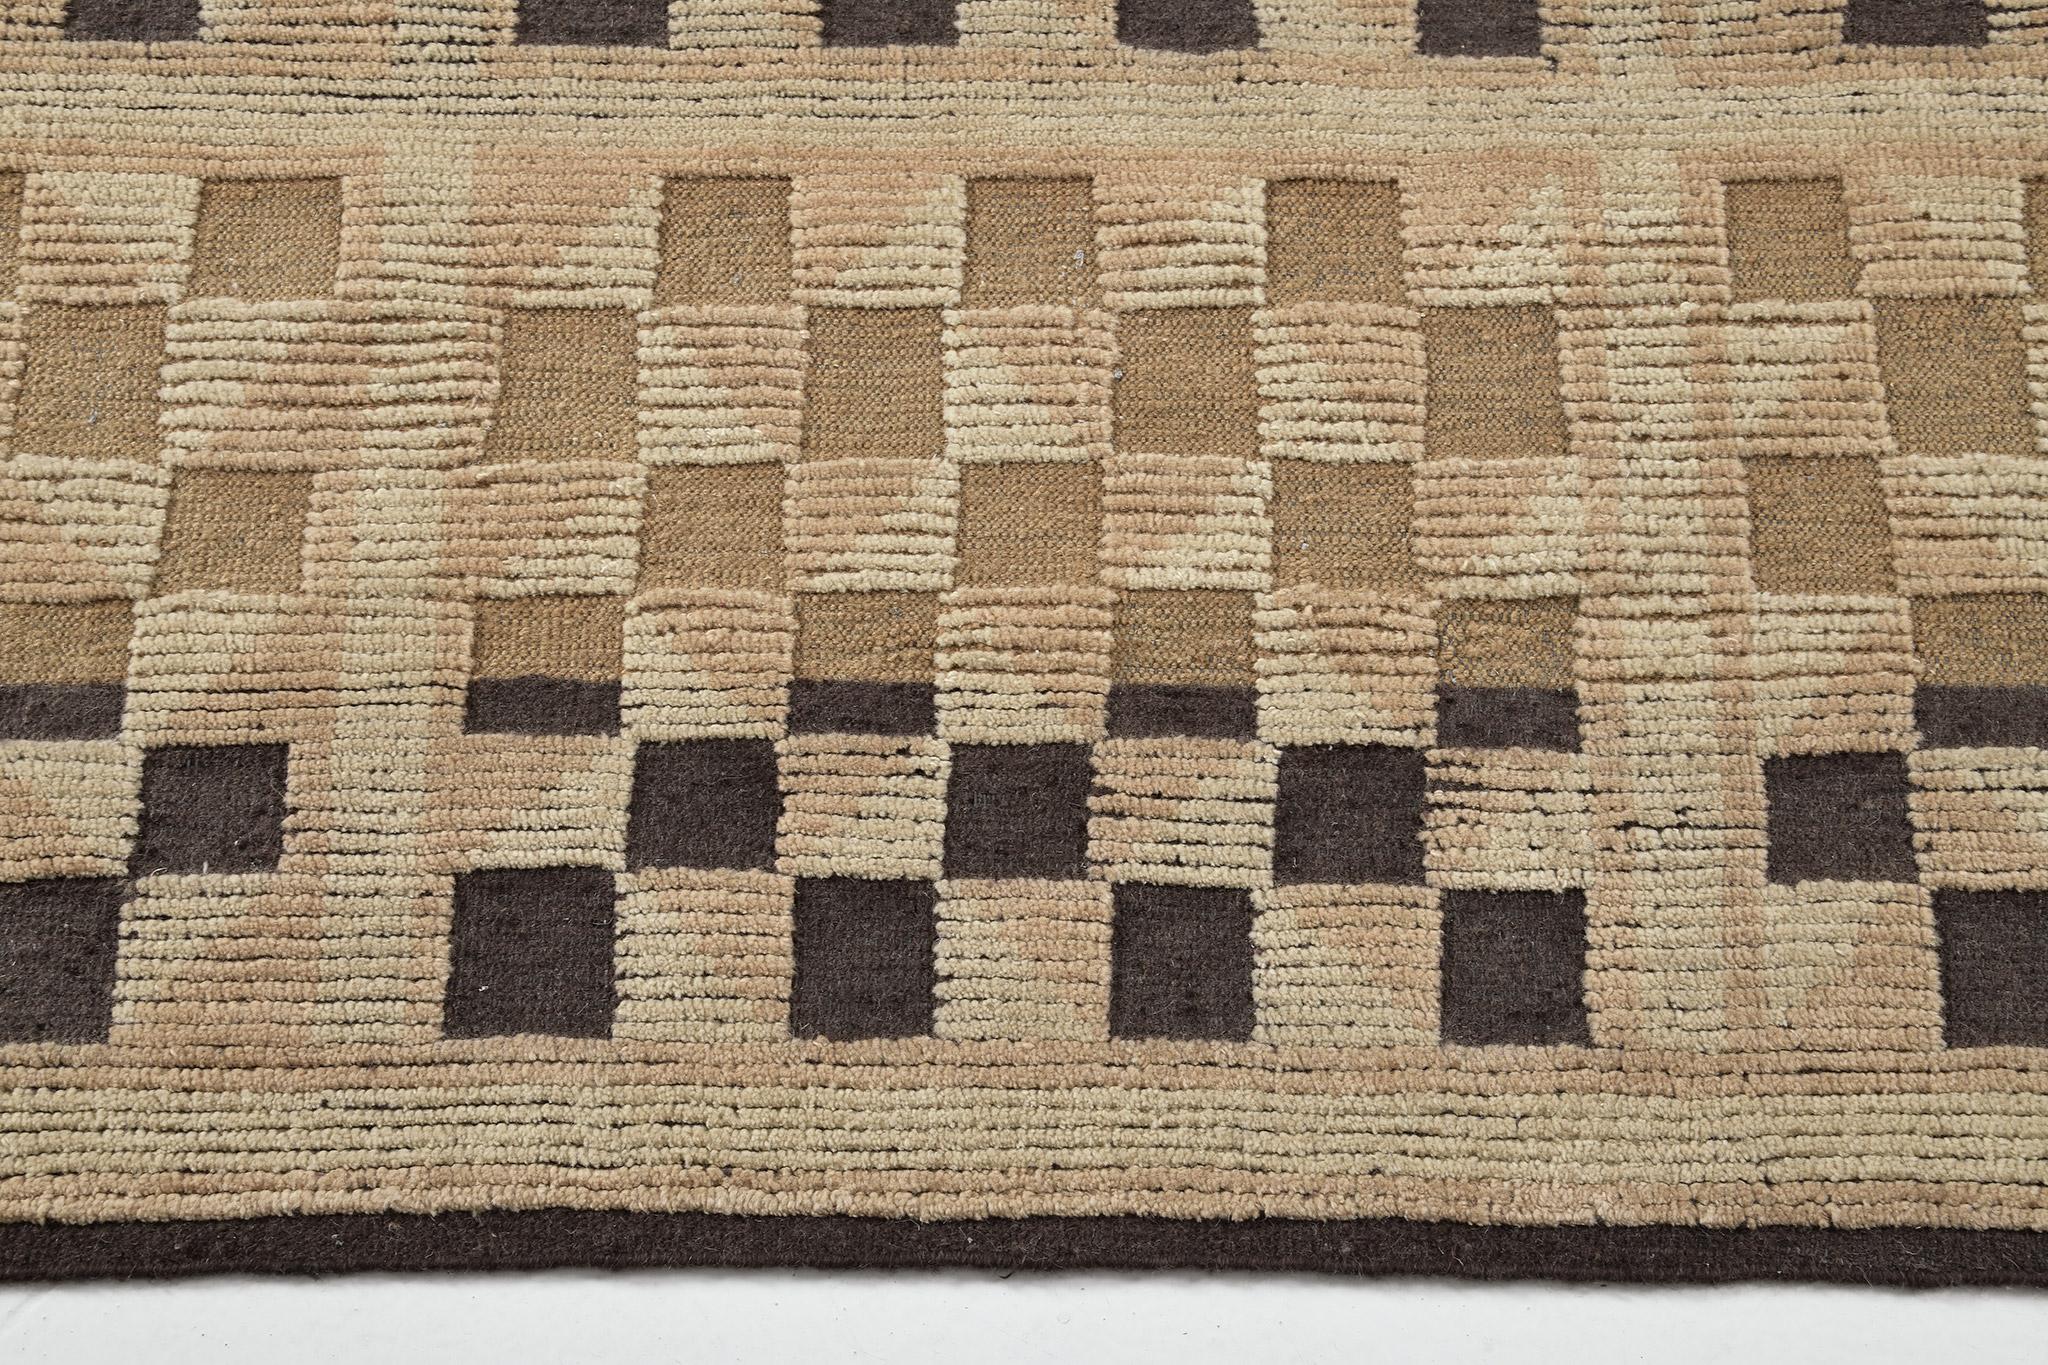 Revealing the panel design checkered motifs, Franc’ in Estancia Collection boasts its character and style. This captivating rug features stunning earthy toned shades in ombre effect of umber brown, tortilla and khaki. This rug creates an impressive